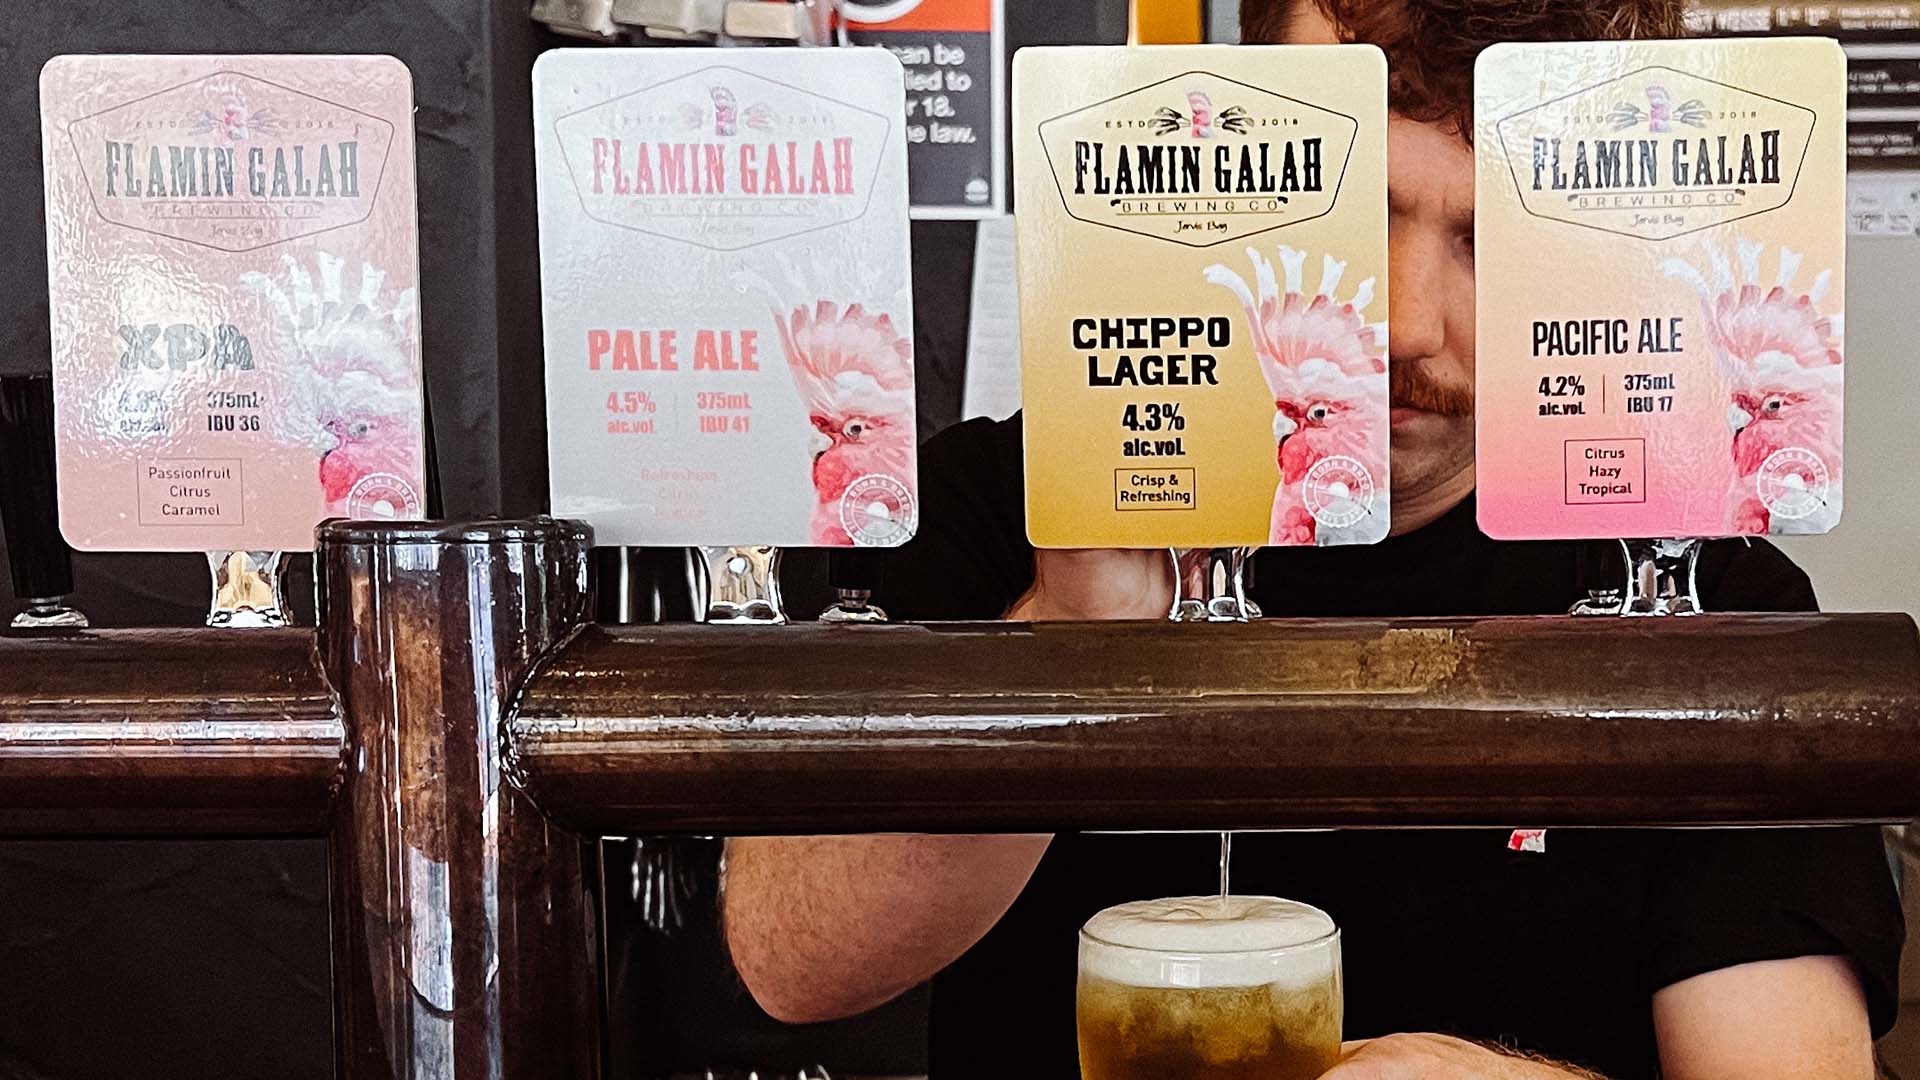 Beloved Jervis Bay Brewery Flamin Galah Has Opened a Huge New Brewpub in Chippendale